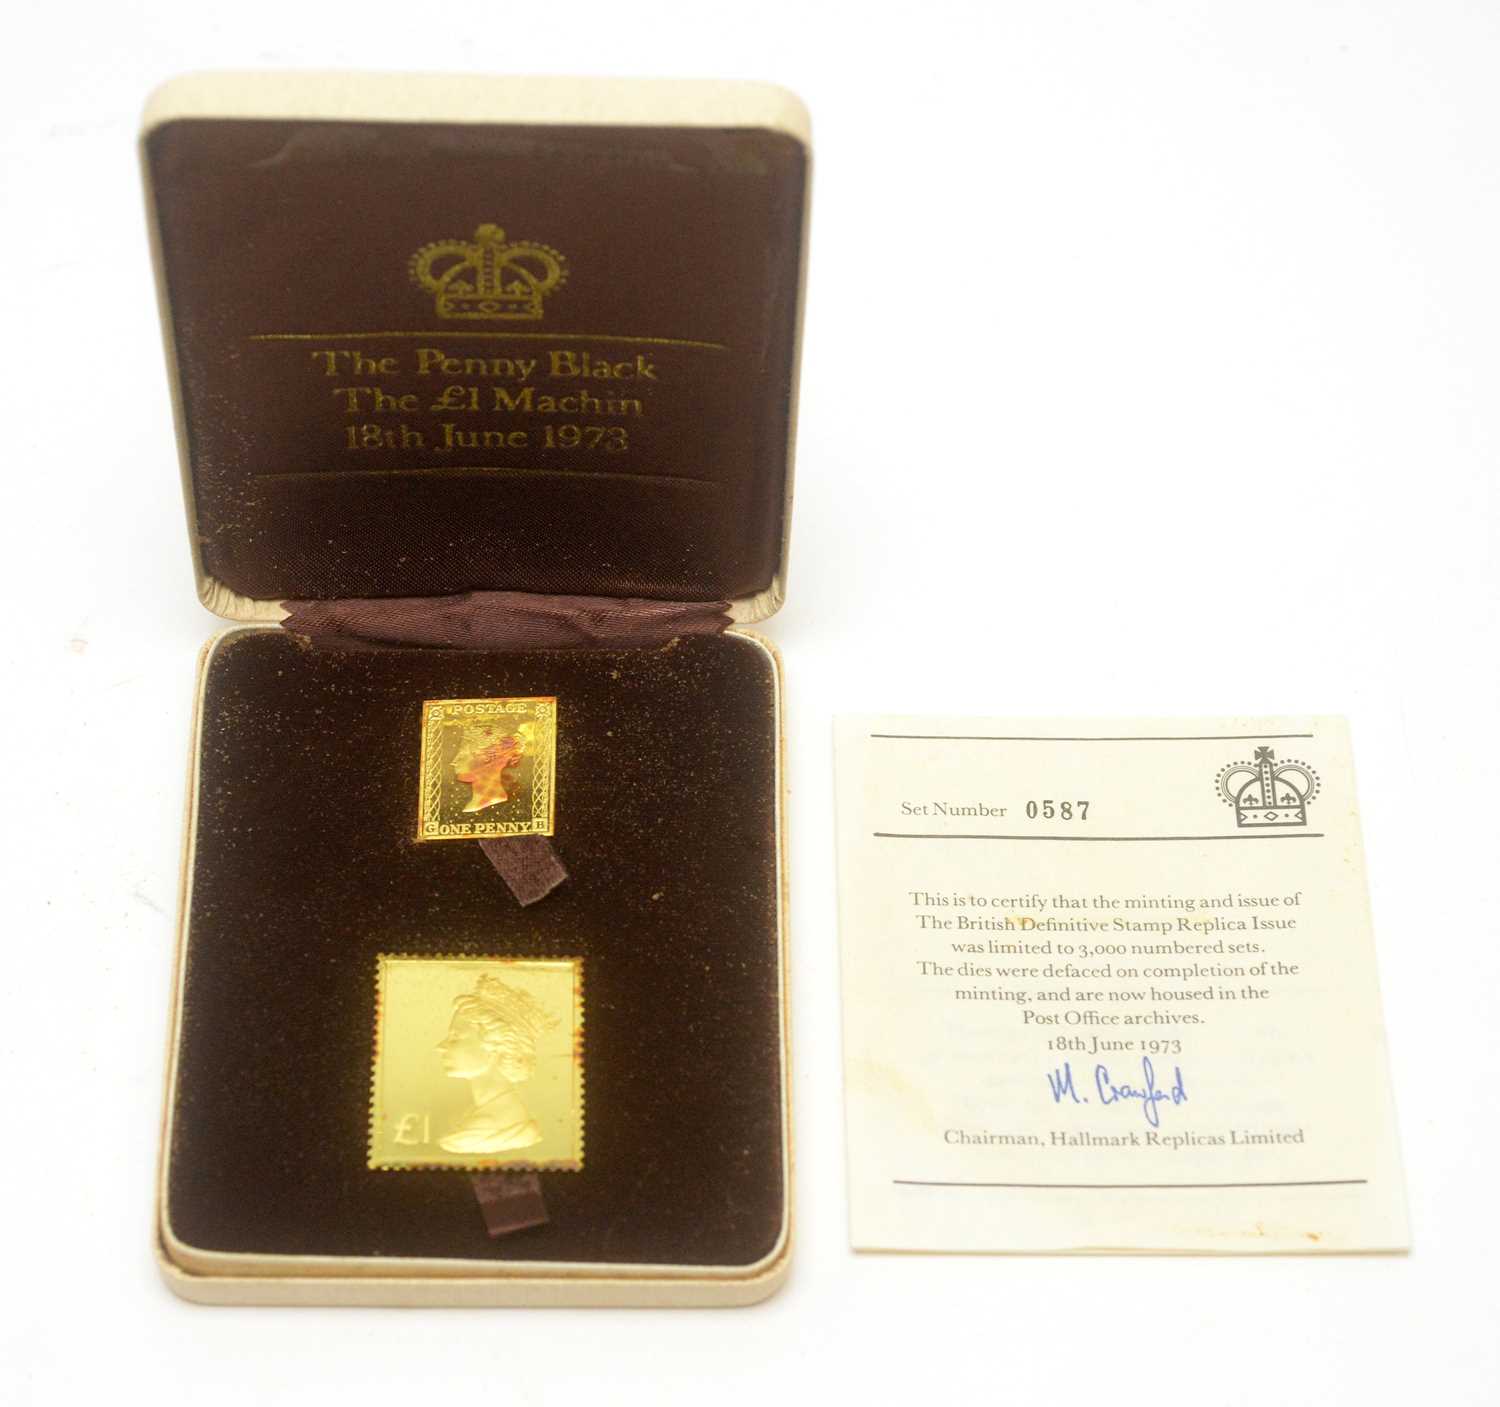 958 - Hallmarks Replica Limited The Penny Black and The £1 Machin stamp replicas, 